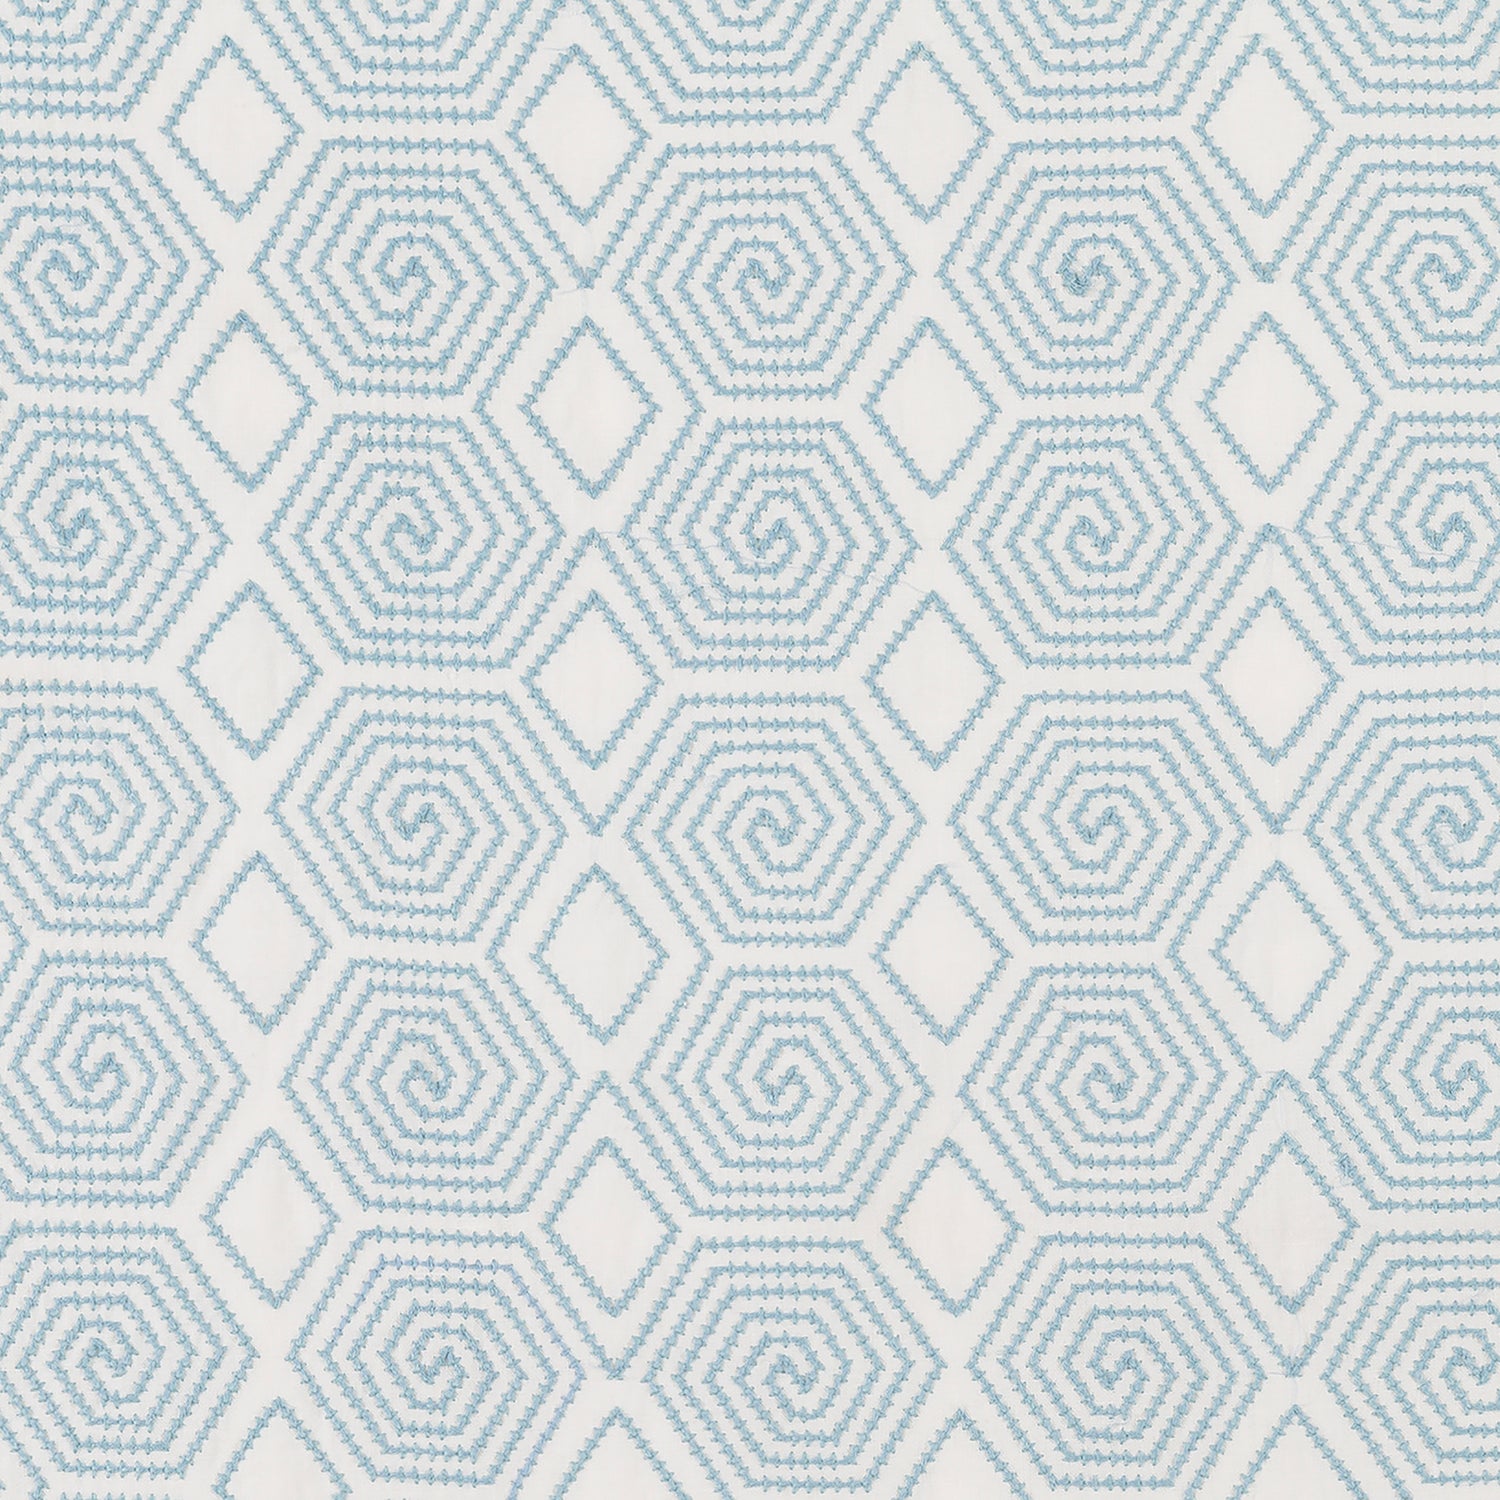 Fabric with a playful embroidered geometric grid print in light blue on a white field.